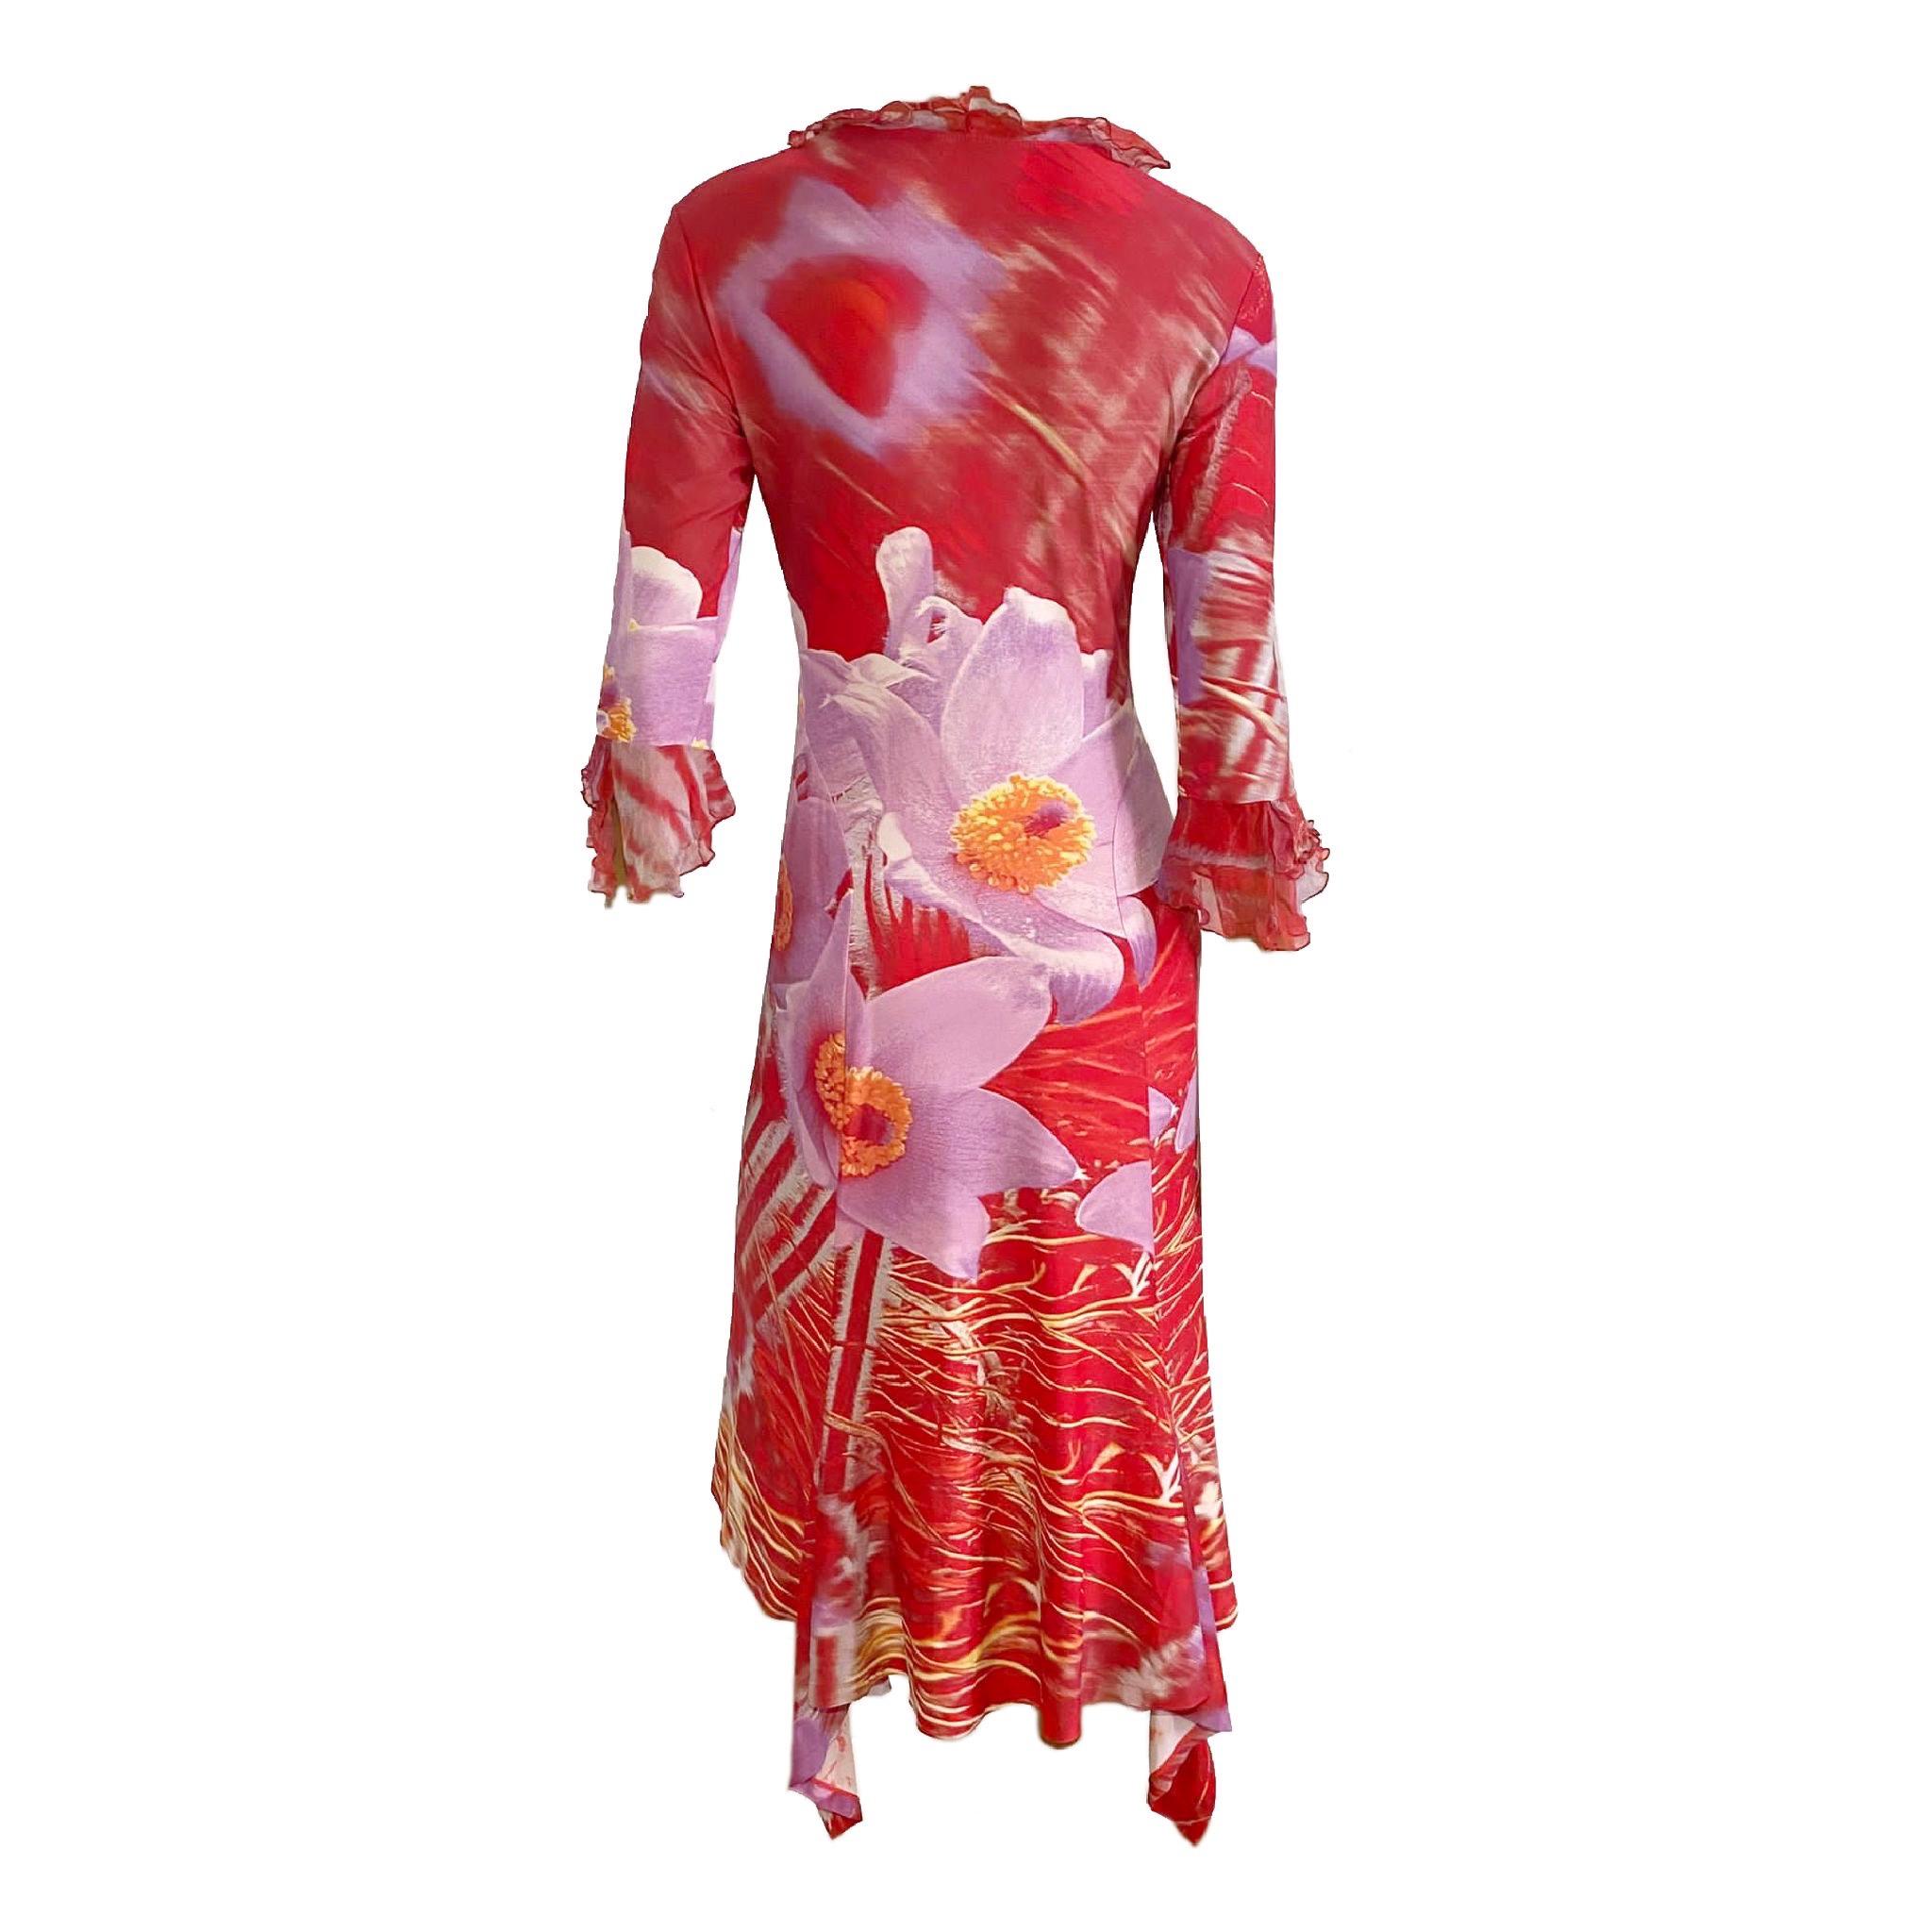 Roberto Cavalli Low-cut red midi dress with pink and yellow floral print from Spring/Summer 2000 collection. Three-quarter ruched organza sleeves with asymmetric flare cut.

Size M, can fit bigger sizes too as fabric is very stretchable.

Shoulder